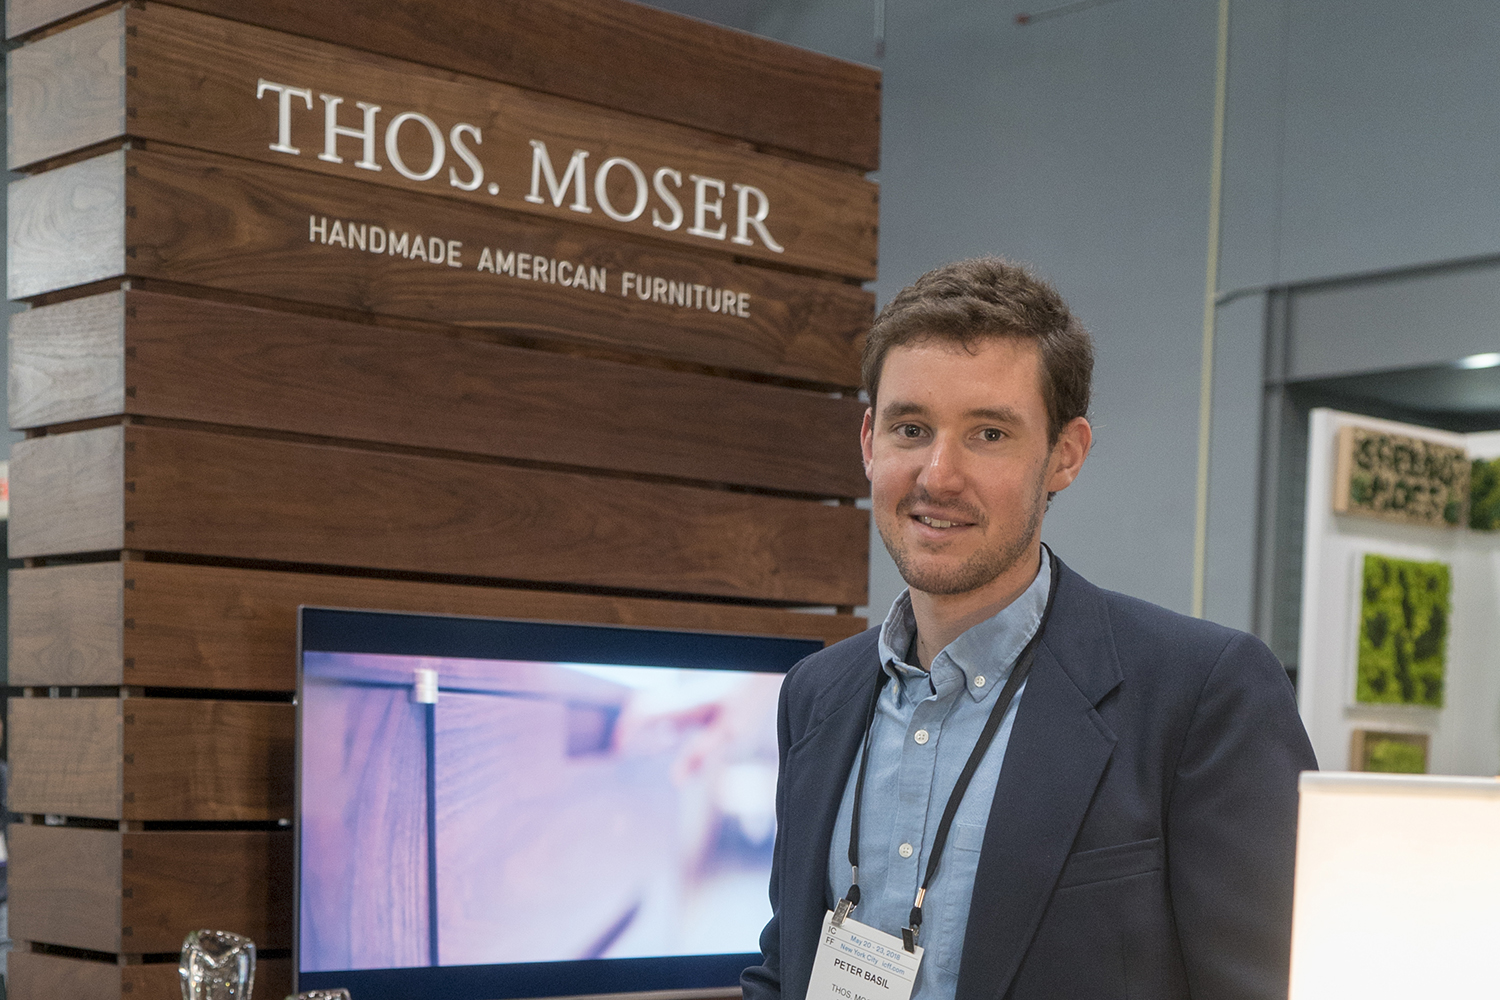 Peter Basil poses in front of a Thos. Moser exhibit at ICFF 2018.